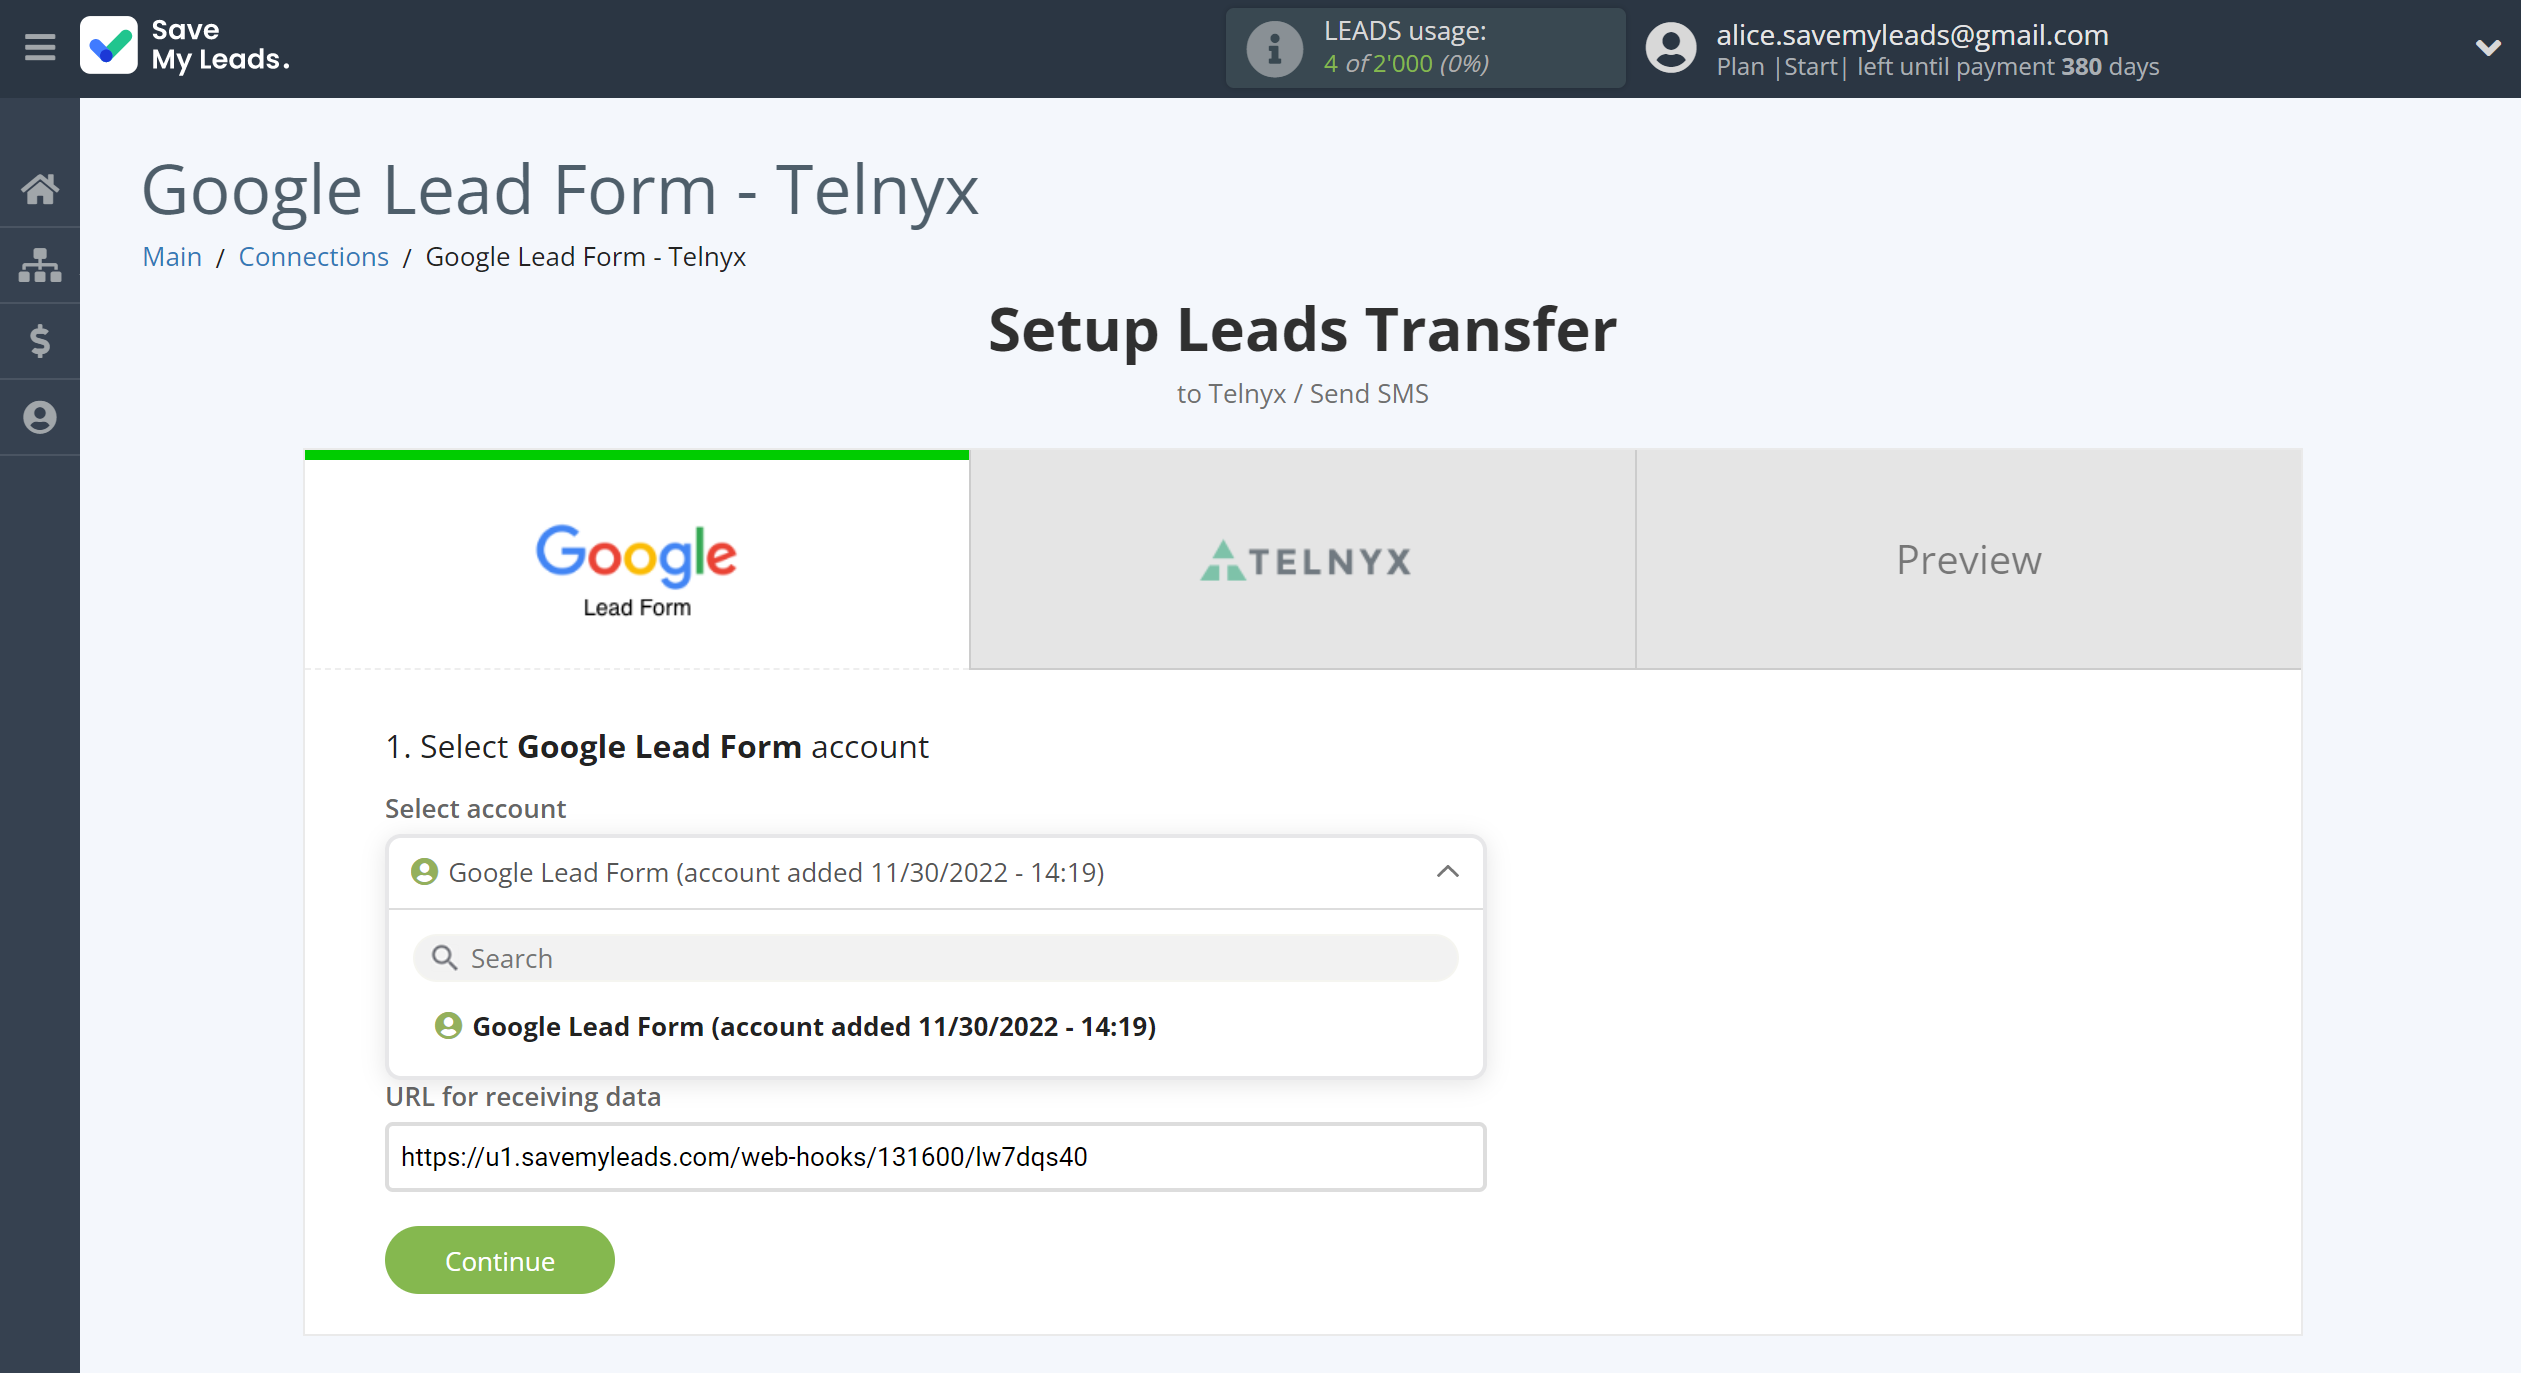 How to Connect Google Lead Form with Telnyx | Data Source account selection